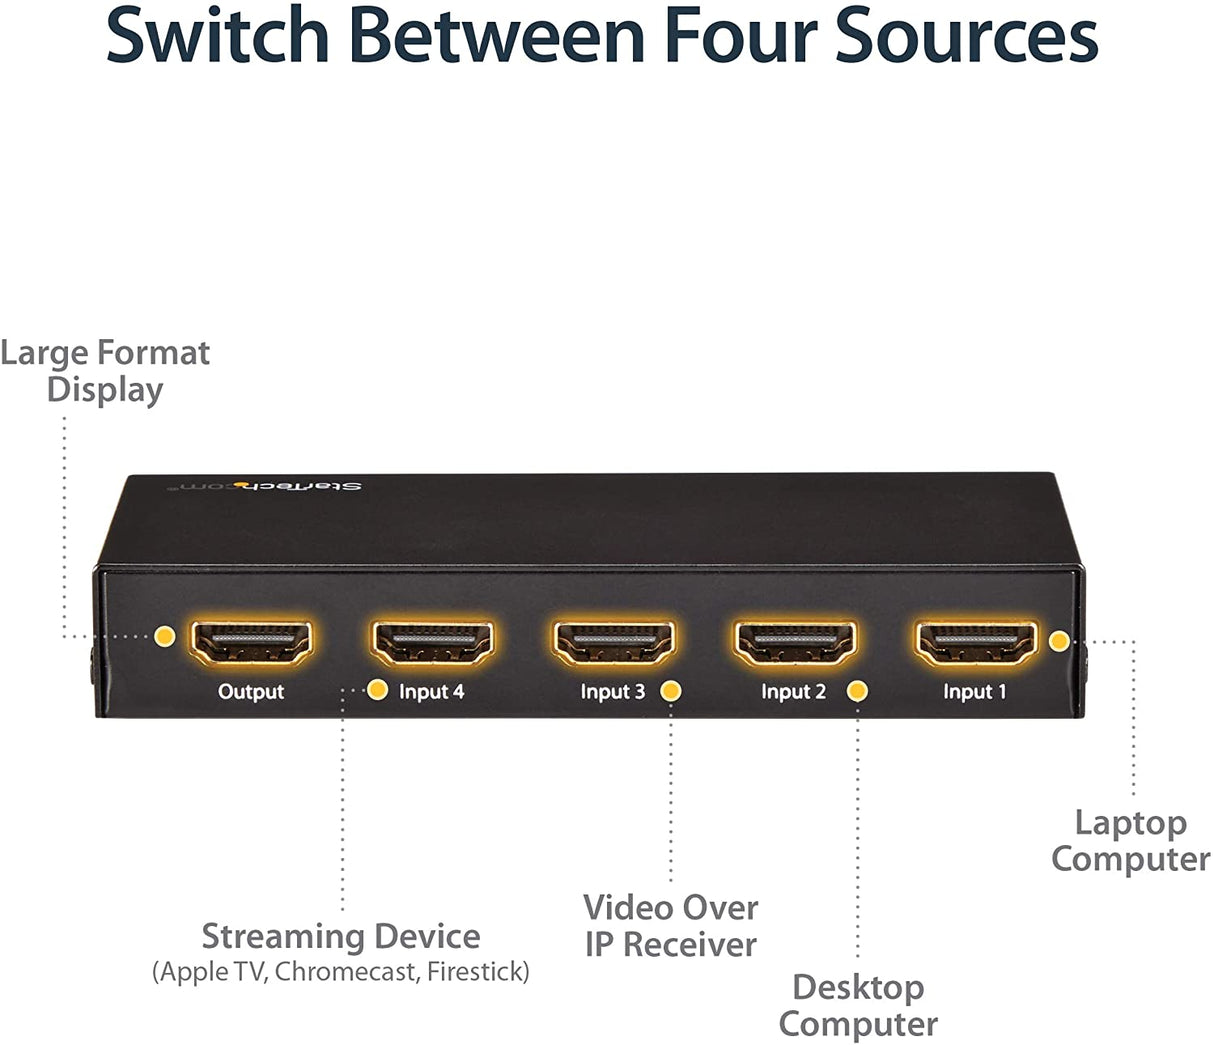 StarTech.com HDMI 2.0 Switch - 4 Port - 4K 60Hz - HDMI Automatic Video Switch Box - Multi Port Hub w/ 1 In 4 Out Functionality (VS421HD20)